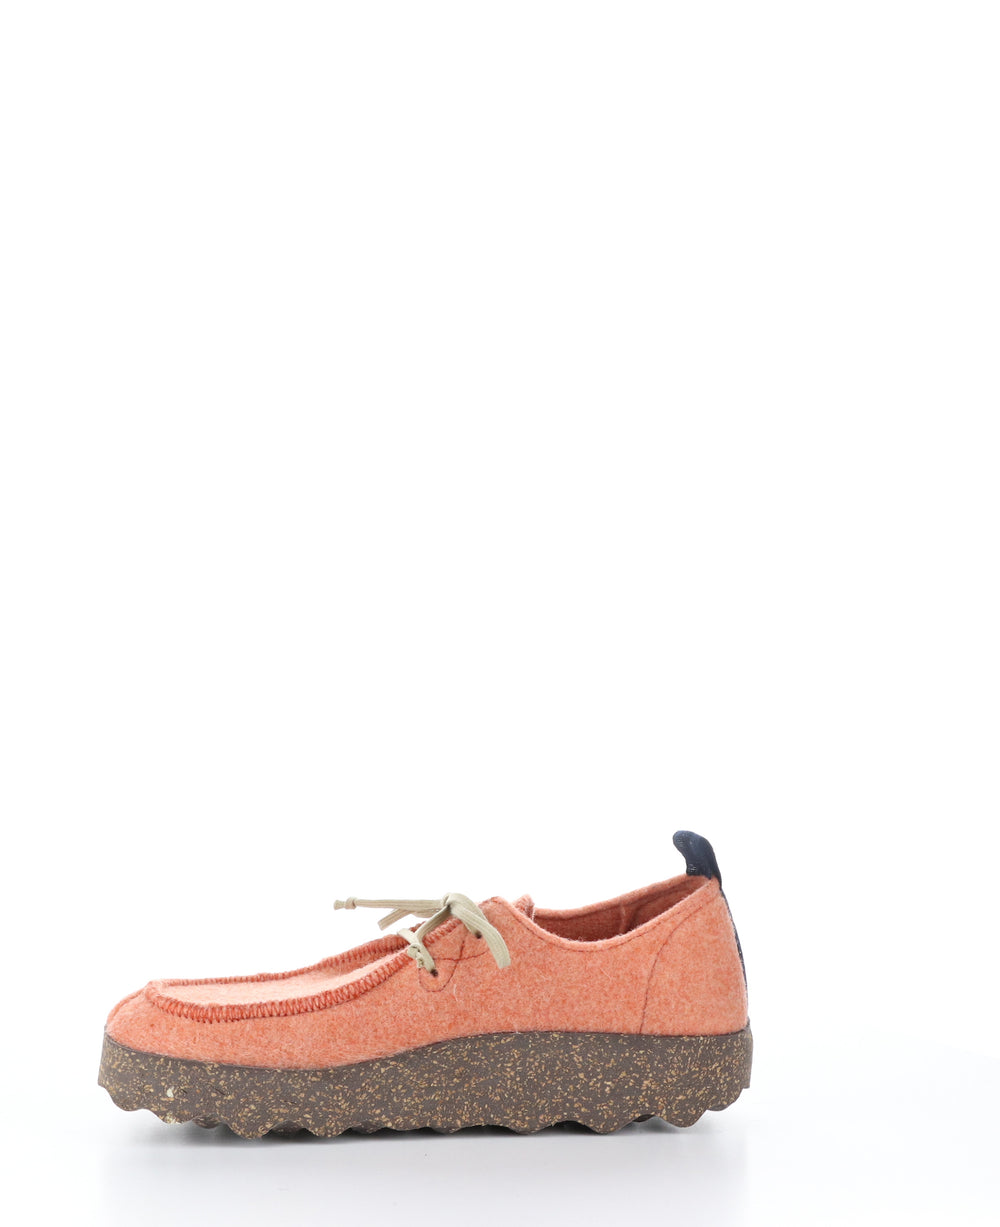 CHAT063ASP Tangerine Round Toe Shoes